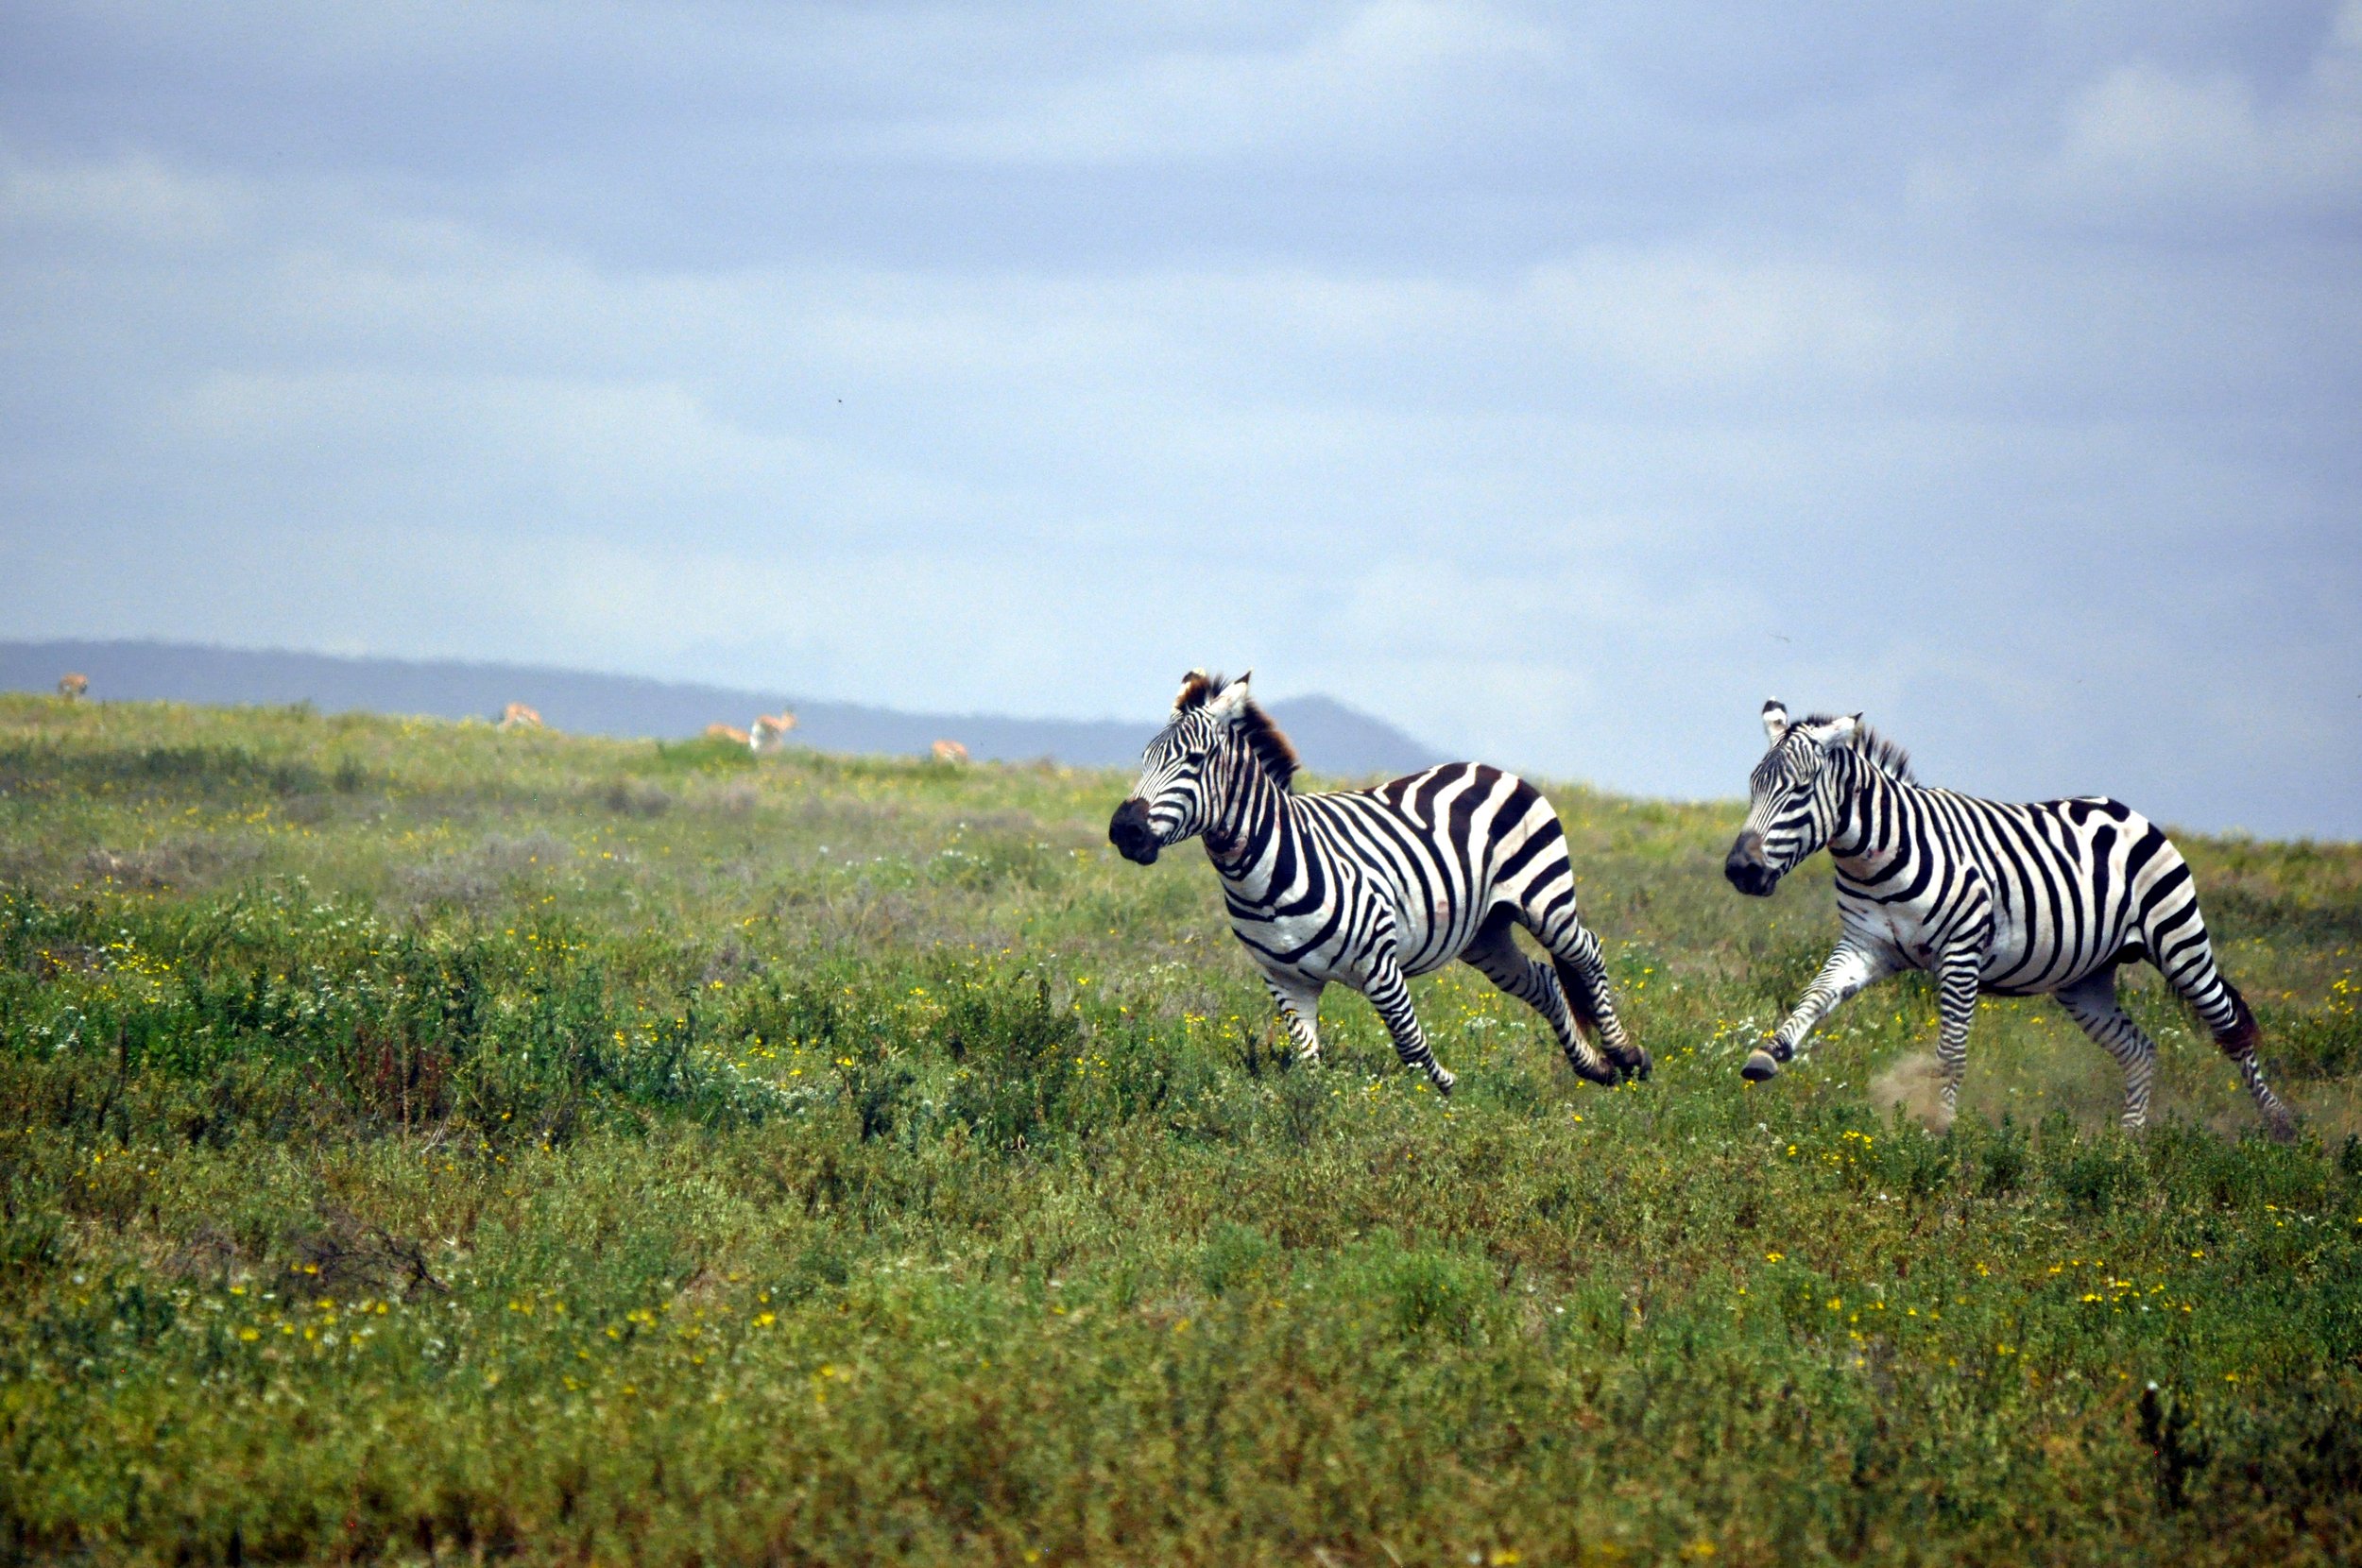 Two Zebras Chasing Each Other